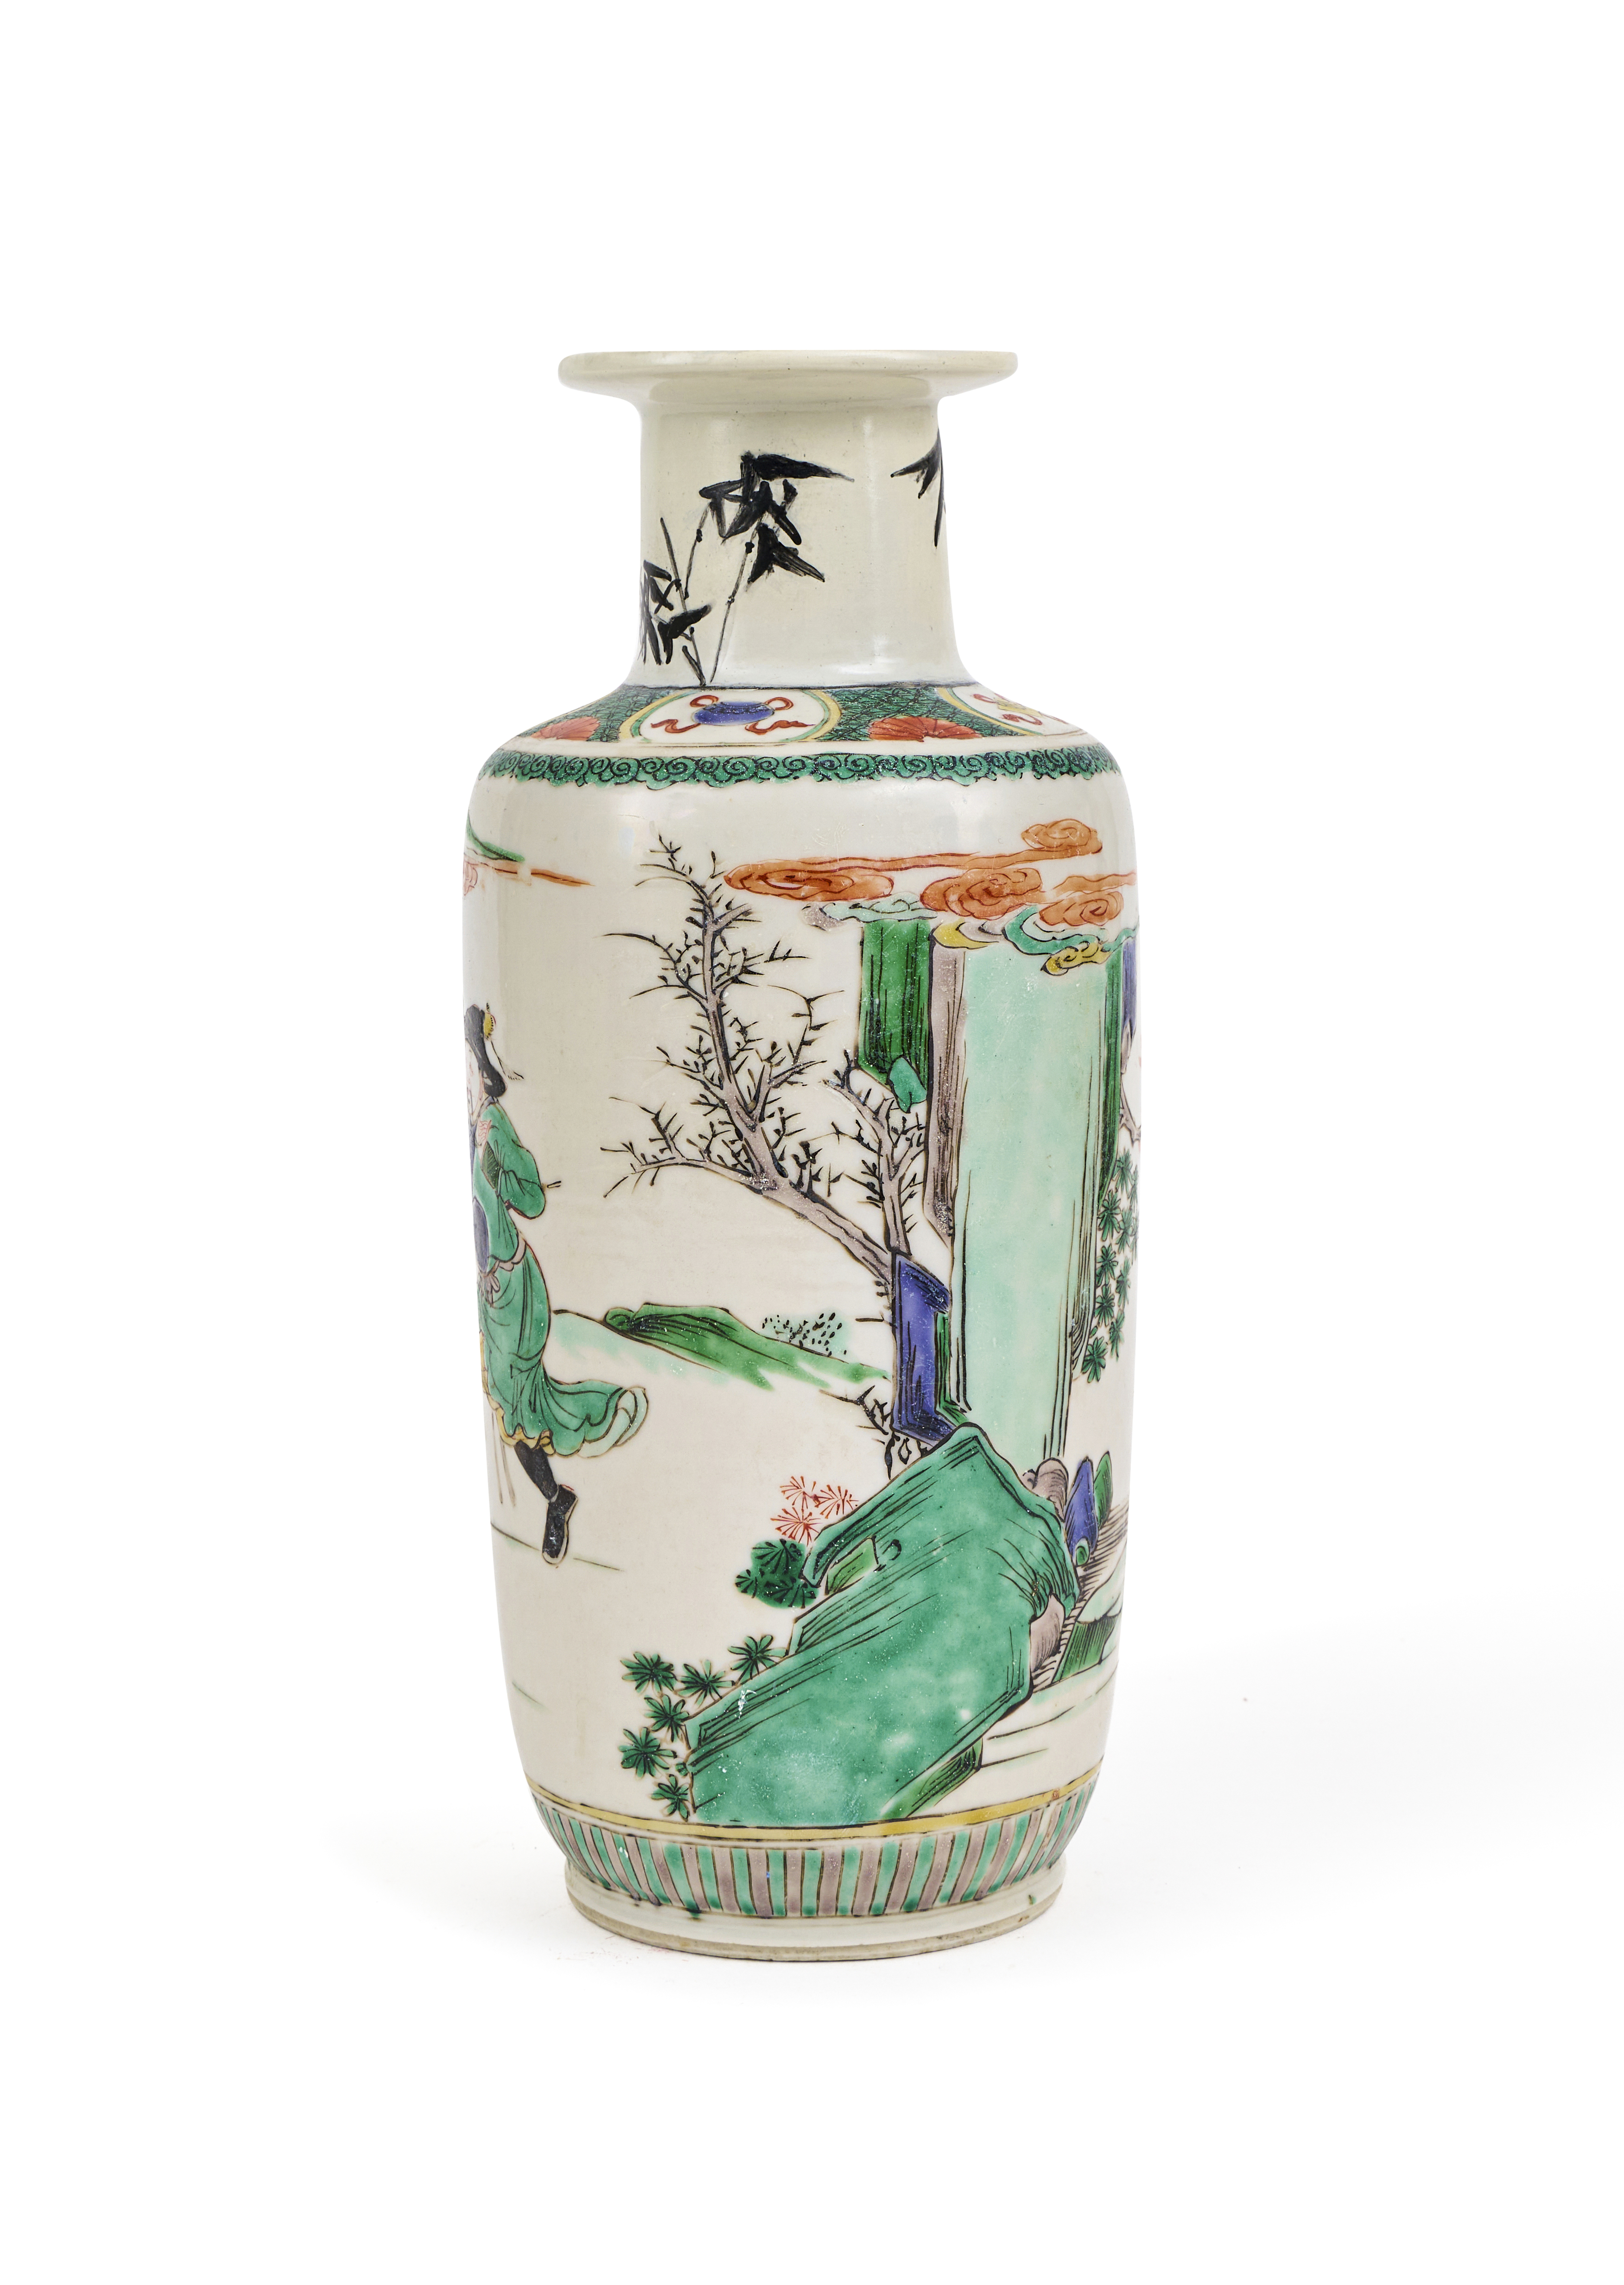 A CHINESE FAMILLE VERTE ROULEAU VASE, 18TH CENTURY - Image 2 of 5